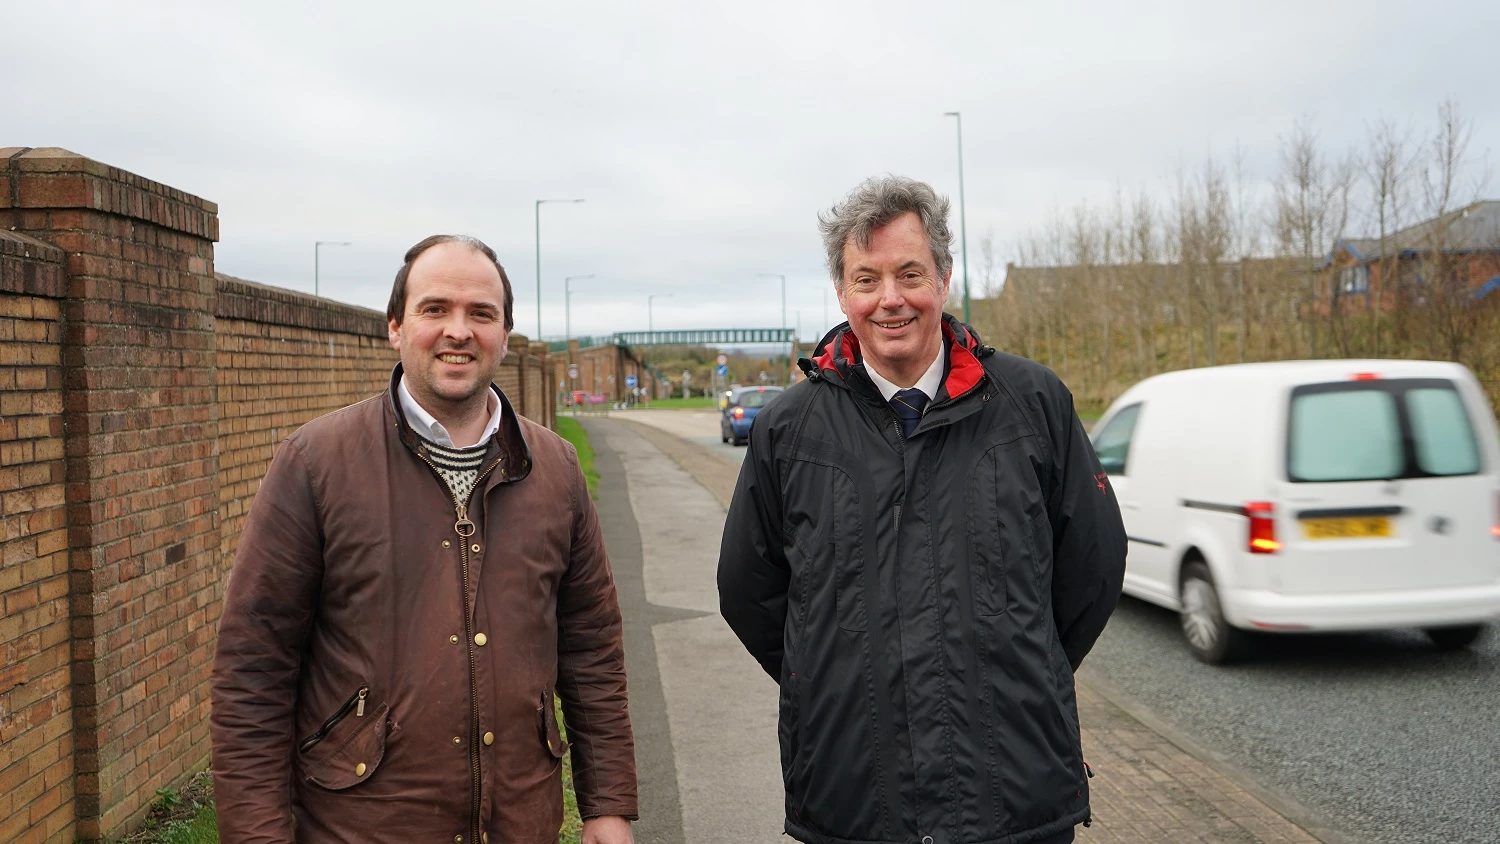 (L-R): Richard Holden MP, Cllr Richard Bell, Durham County Council’s Deputy Leader and Cabinet member for finance.